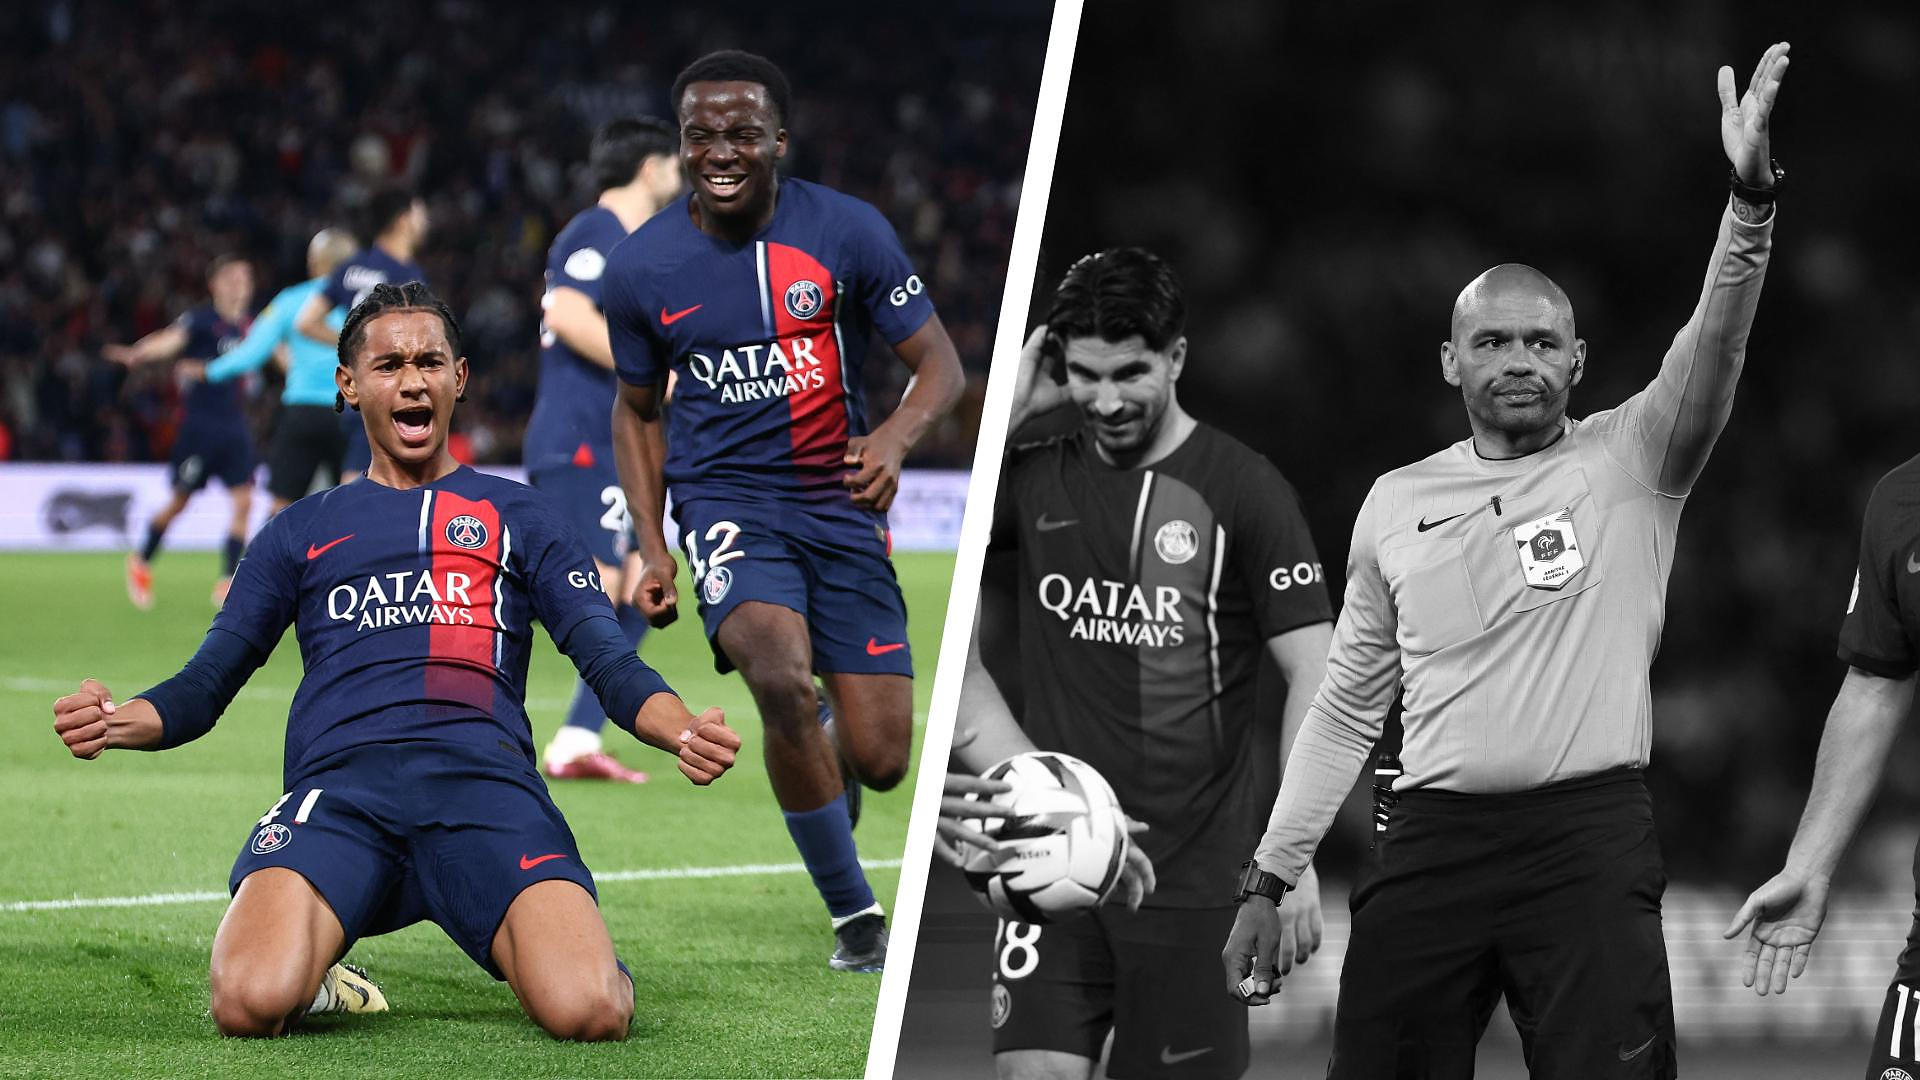 PSG-Clermont: the titis show themselves, arbitration (again) in question... Favorites and scratches